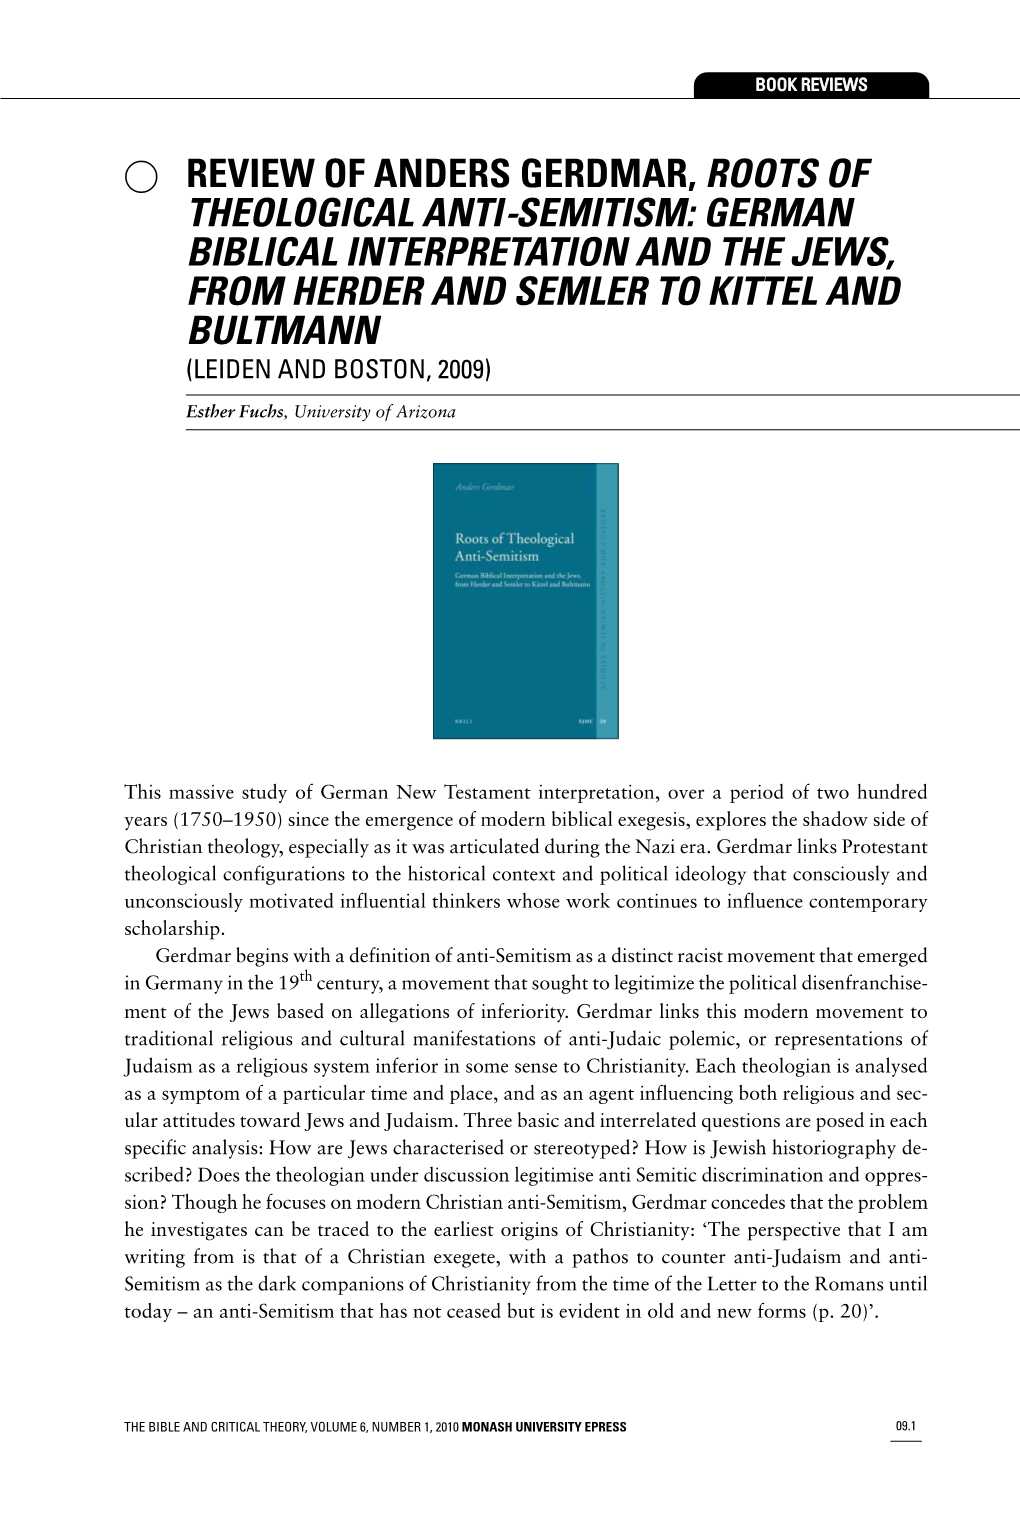 German Biblical Interpretation and the Jews, from Herder and Semler to Kittel and Bultmann (Leiden and Boston, 2009)